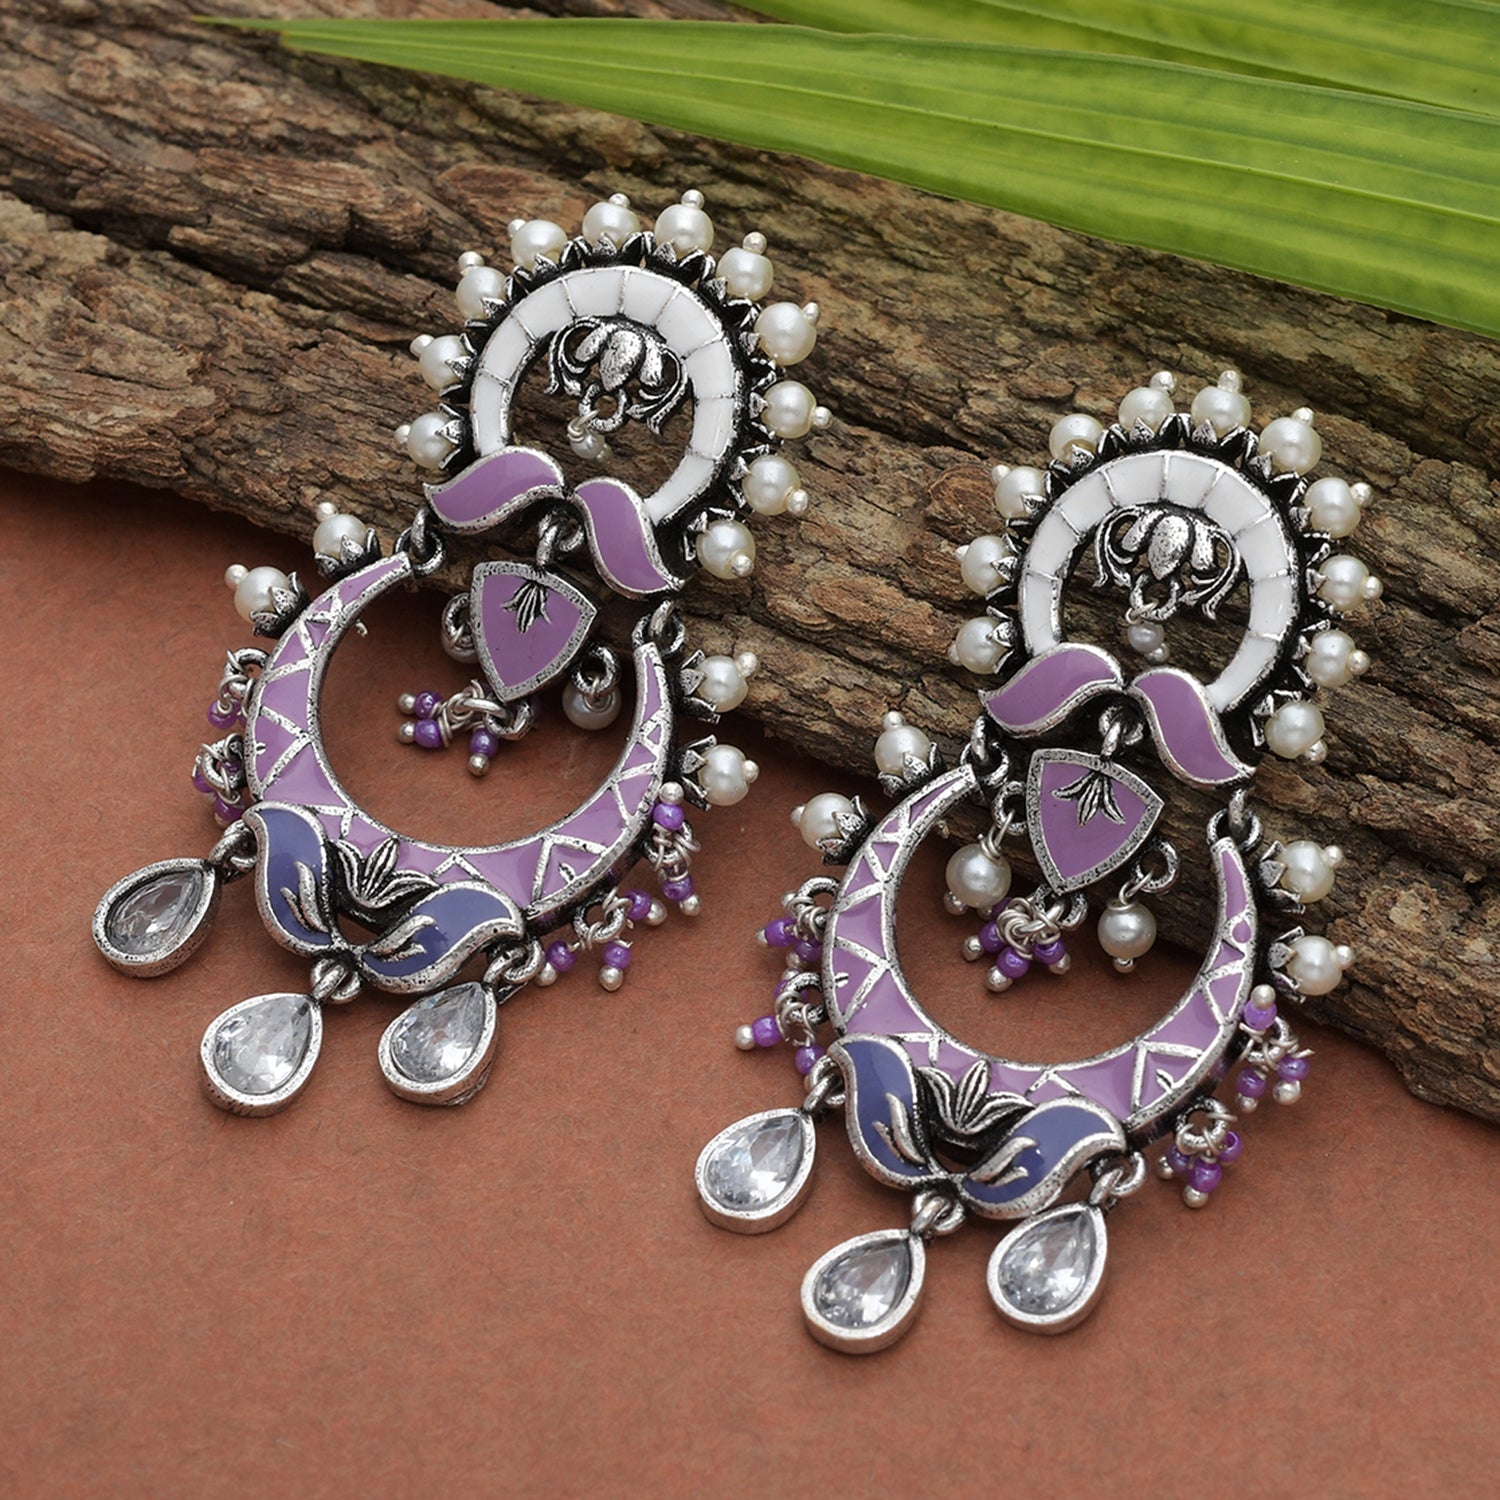 Women's Shwet Kamal Floral Motifs Faux Pearls And Kundan Adorned Silver Plated Earrings - Voylla